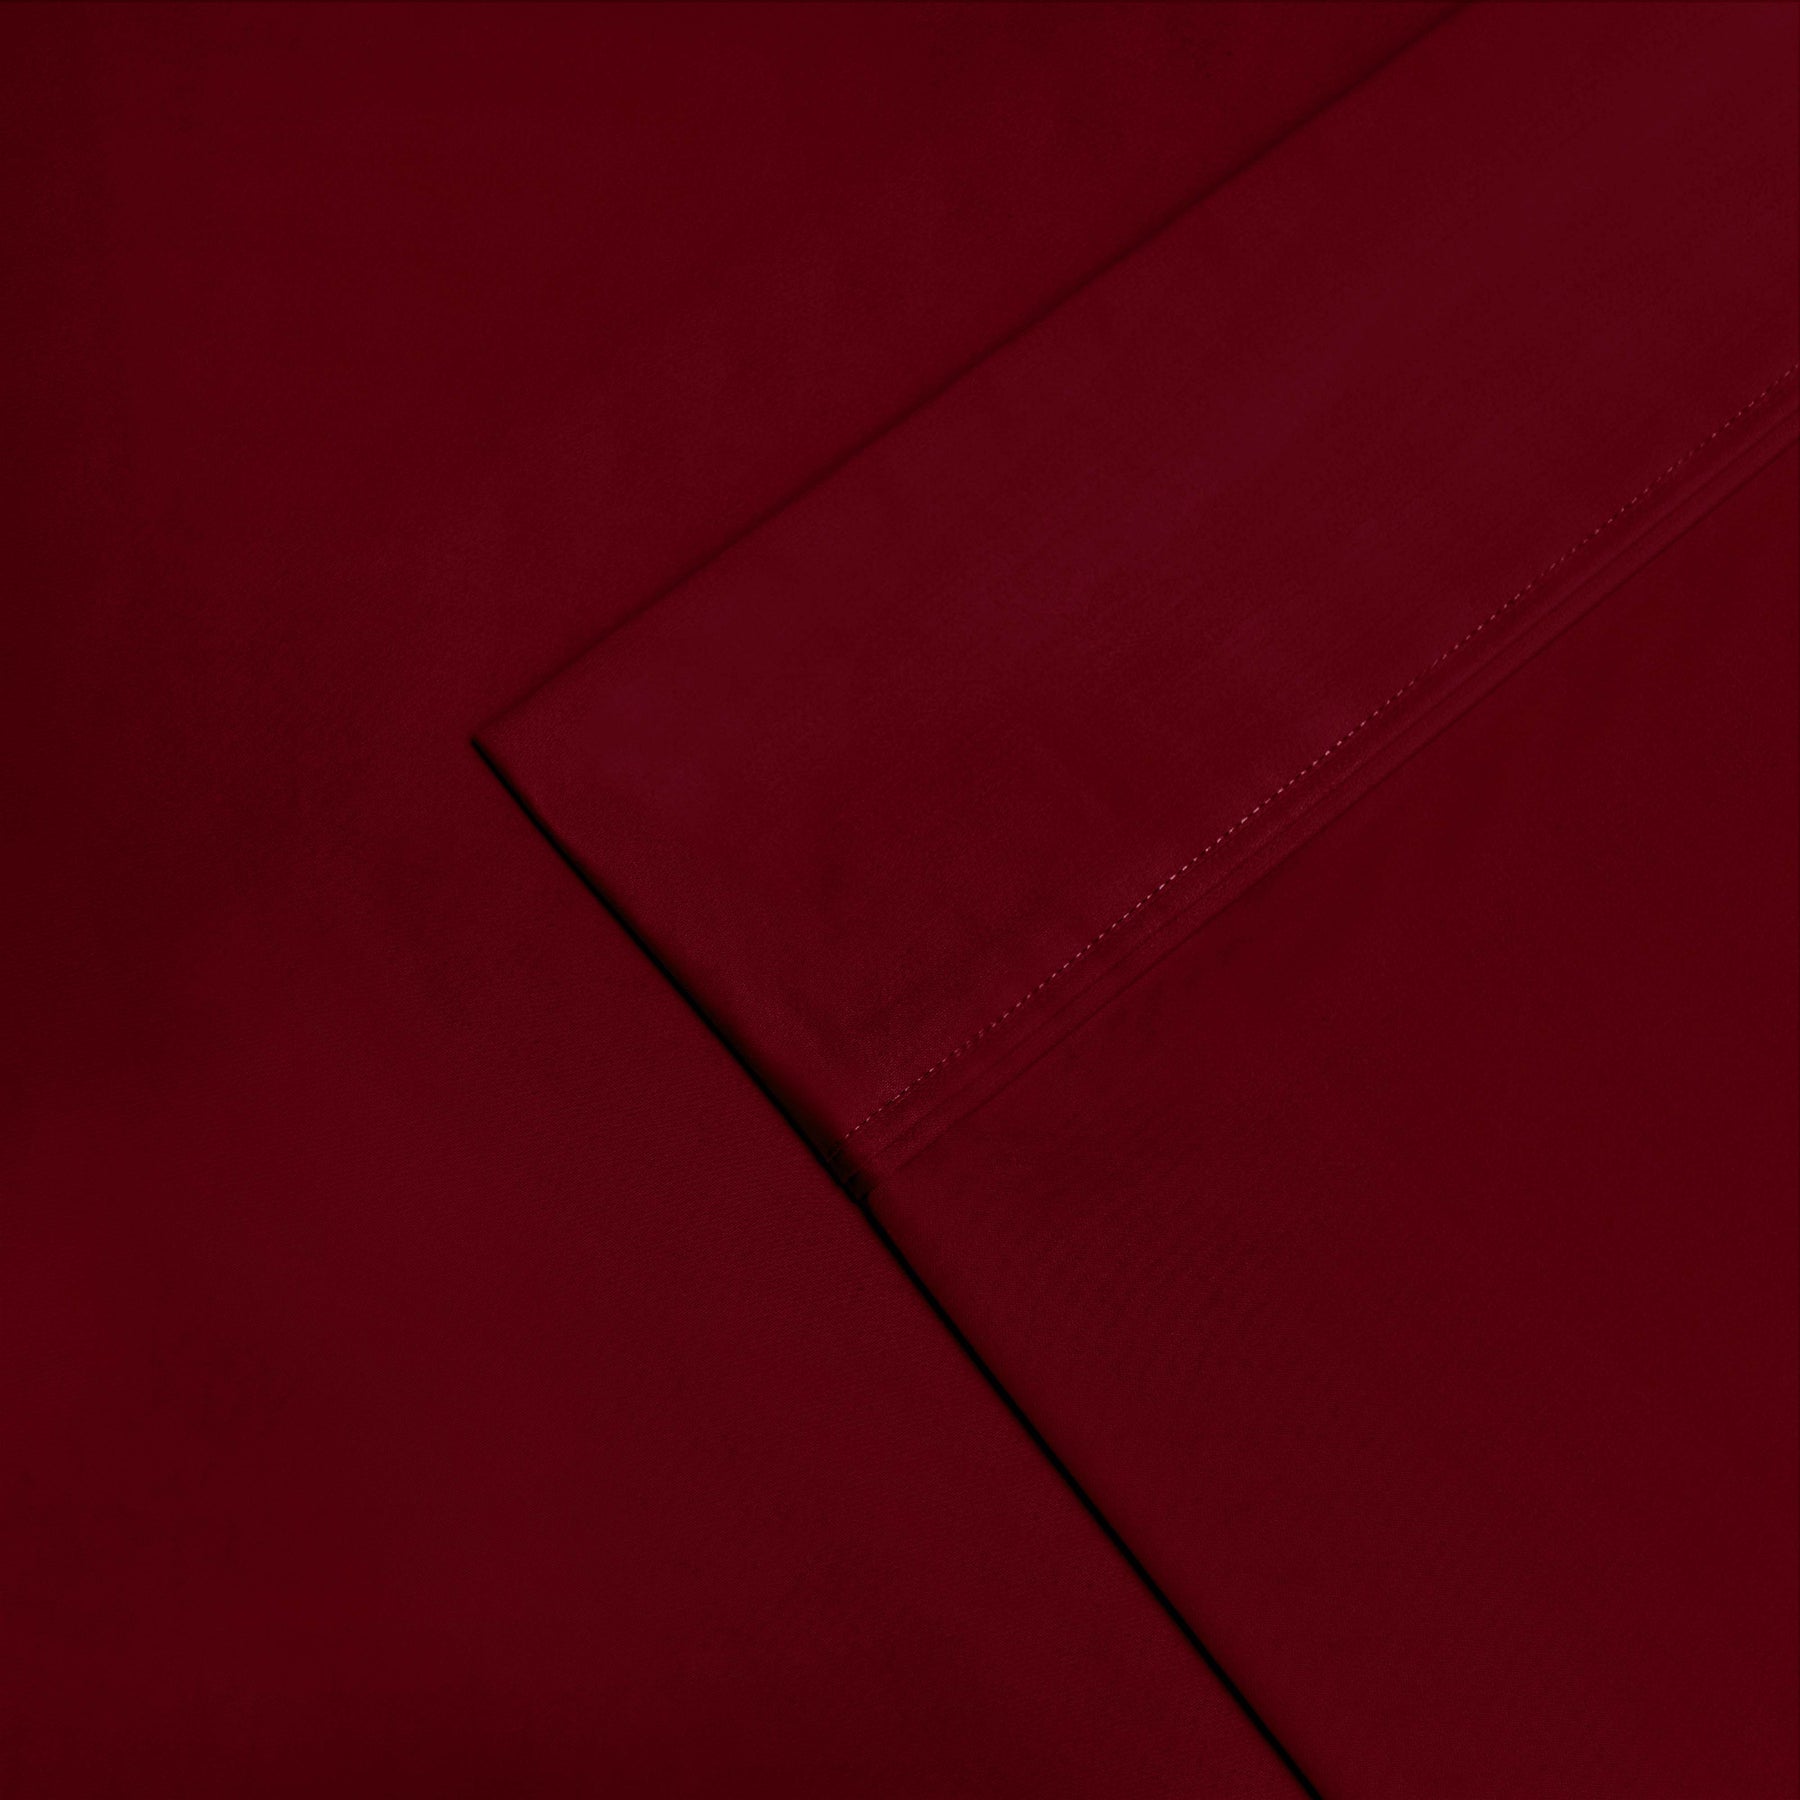 Egyptian Cotton 1200 Thread Count Eco-Friendly Solid Sheet Set - Burgundy